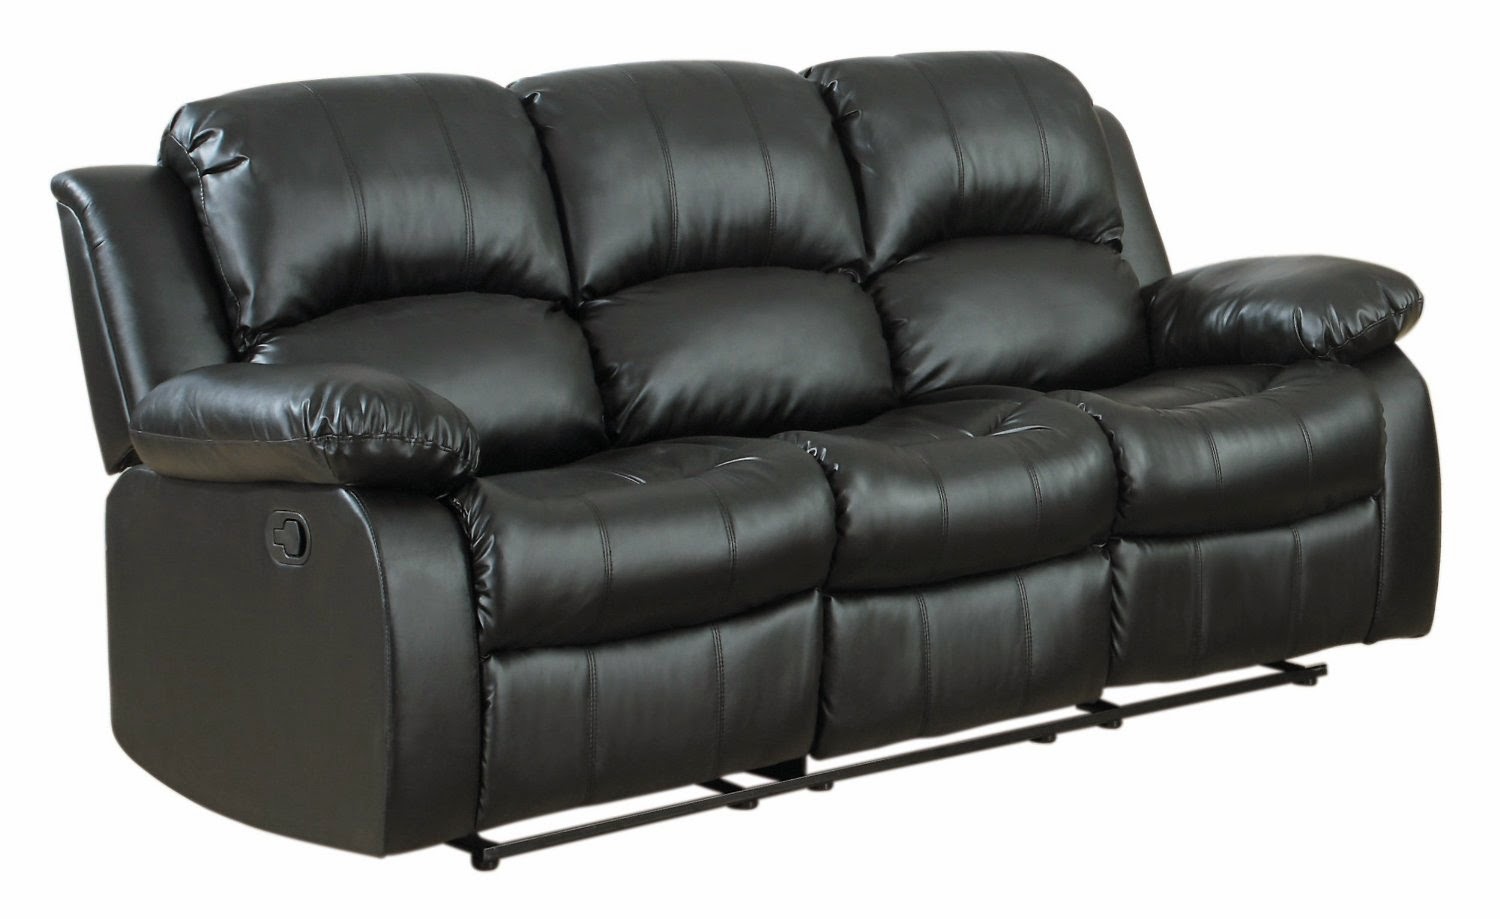 leather-double-reclining-sofa